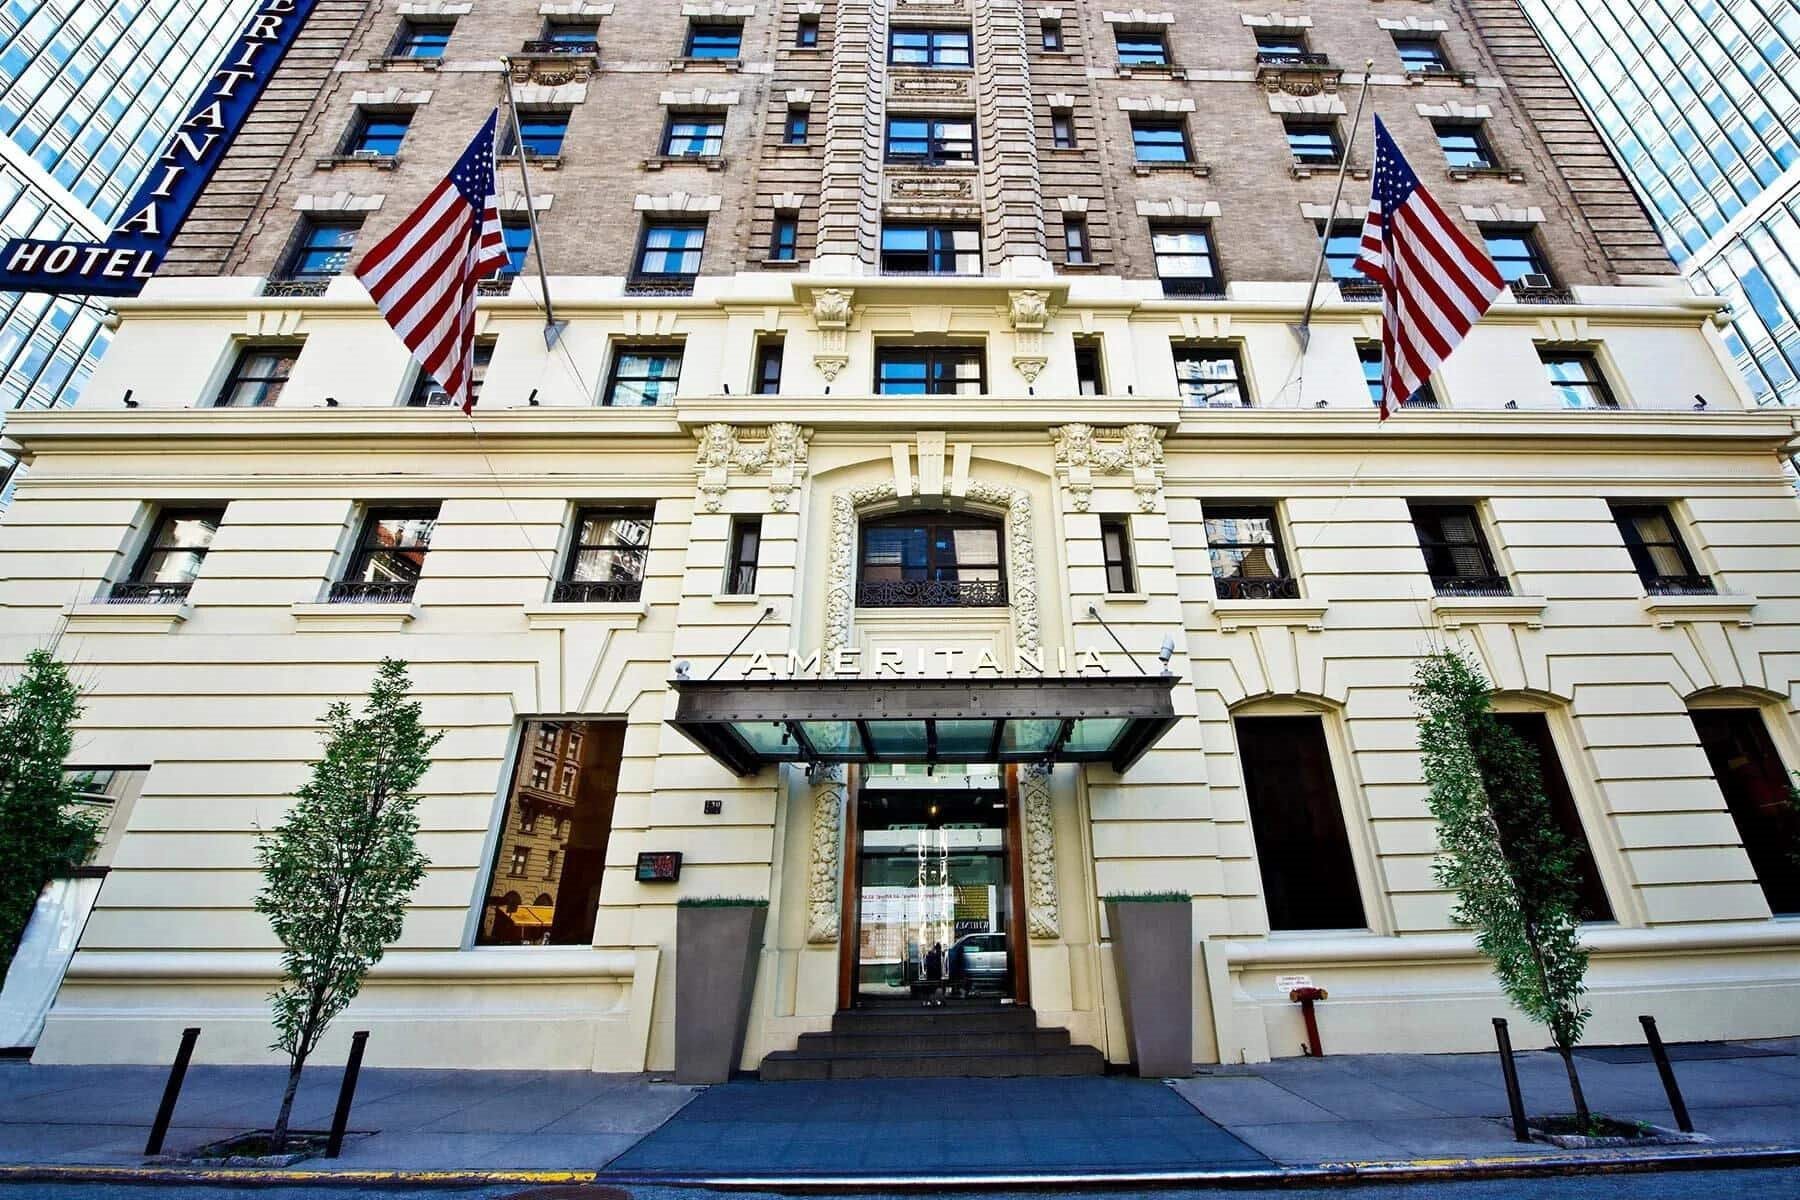 Welcome to the Ameritania at Times Square, a Boutique Hotel in New York City's Theater District 